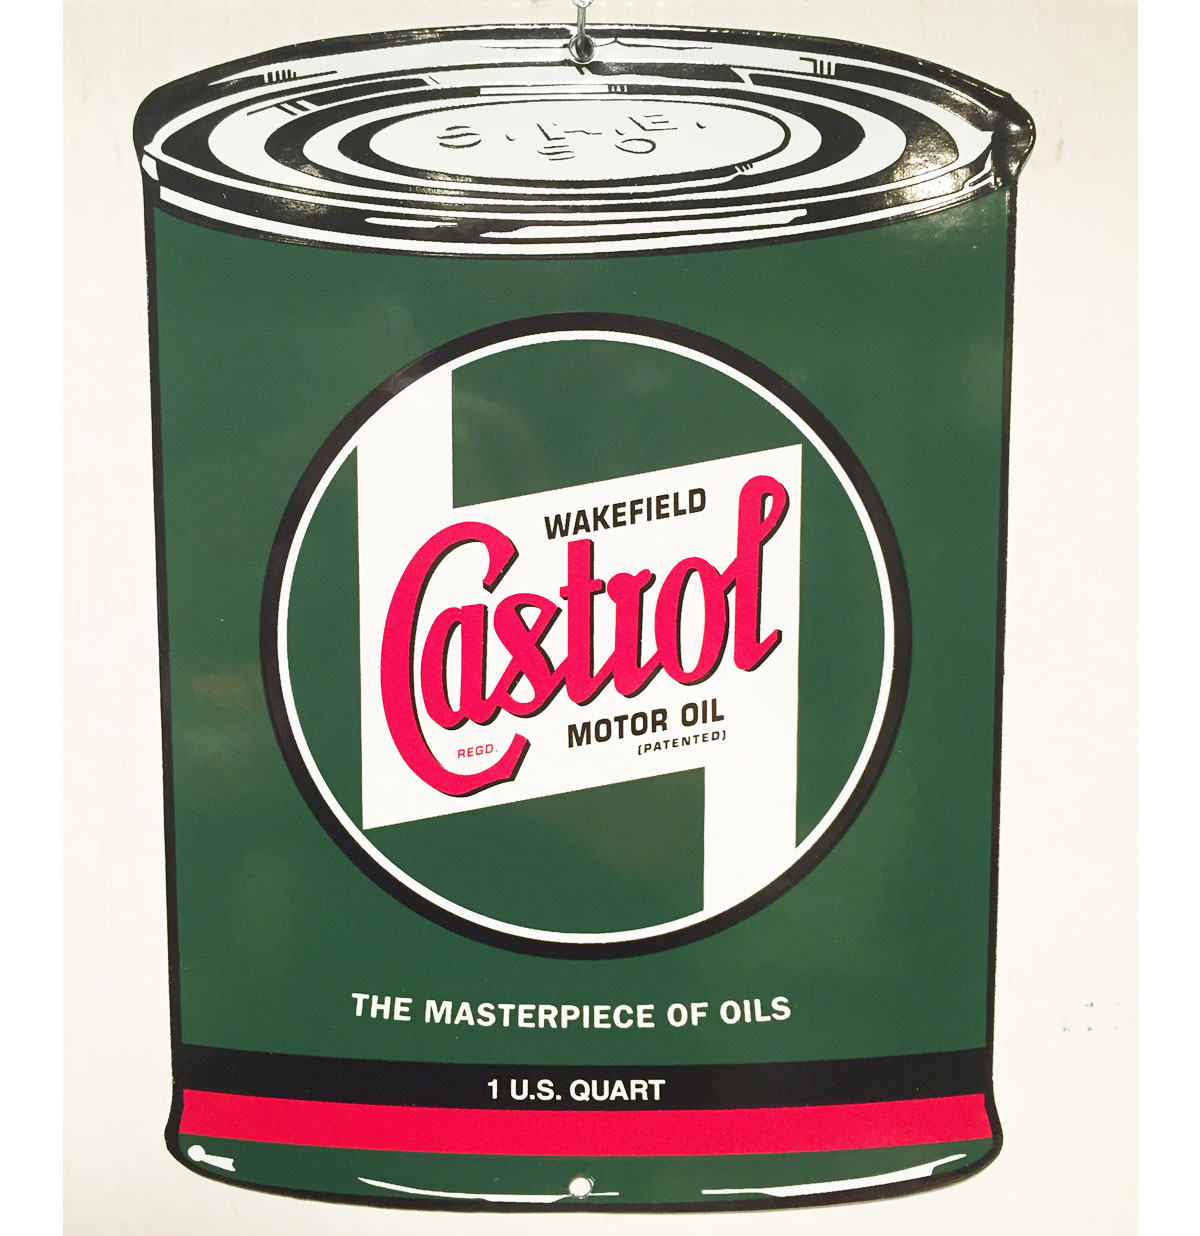 Castrol Motor Oil - Oil Can Shaped Emaille Bord